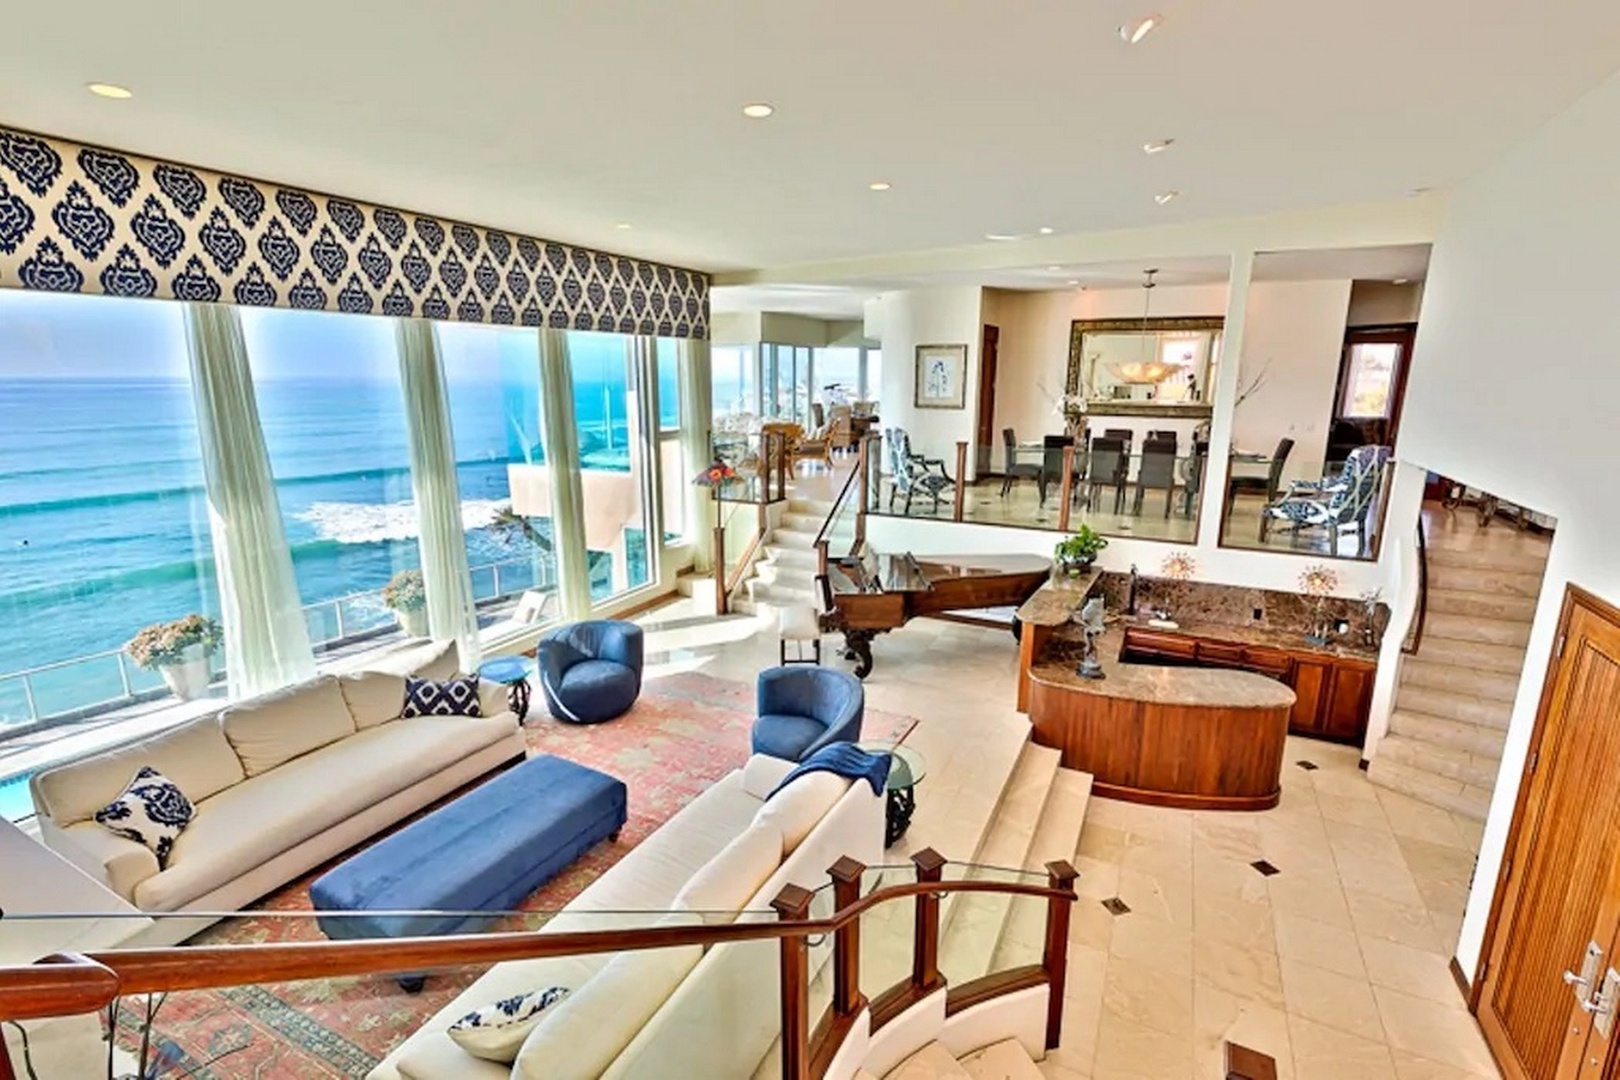 Expansive living room with stunning ocean views